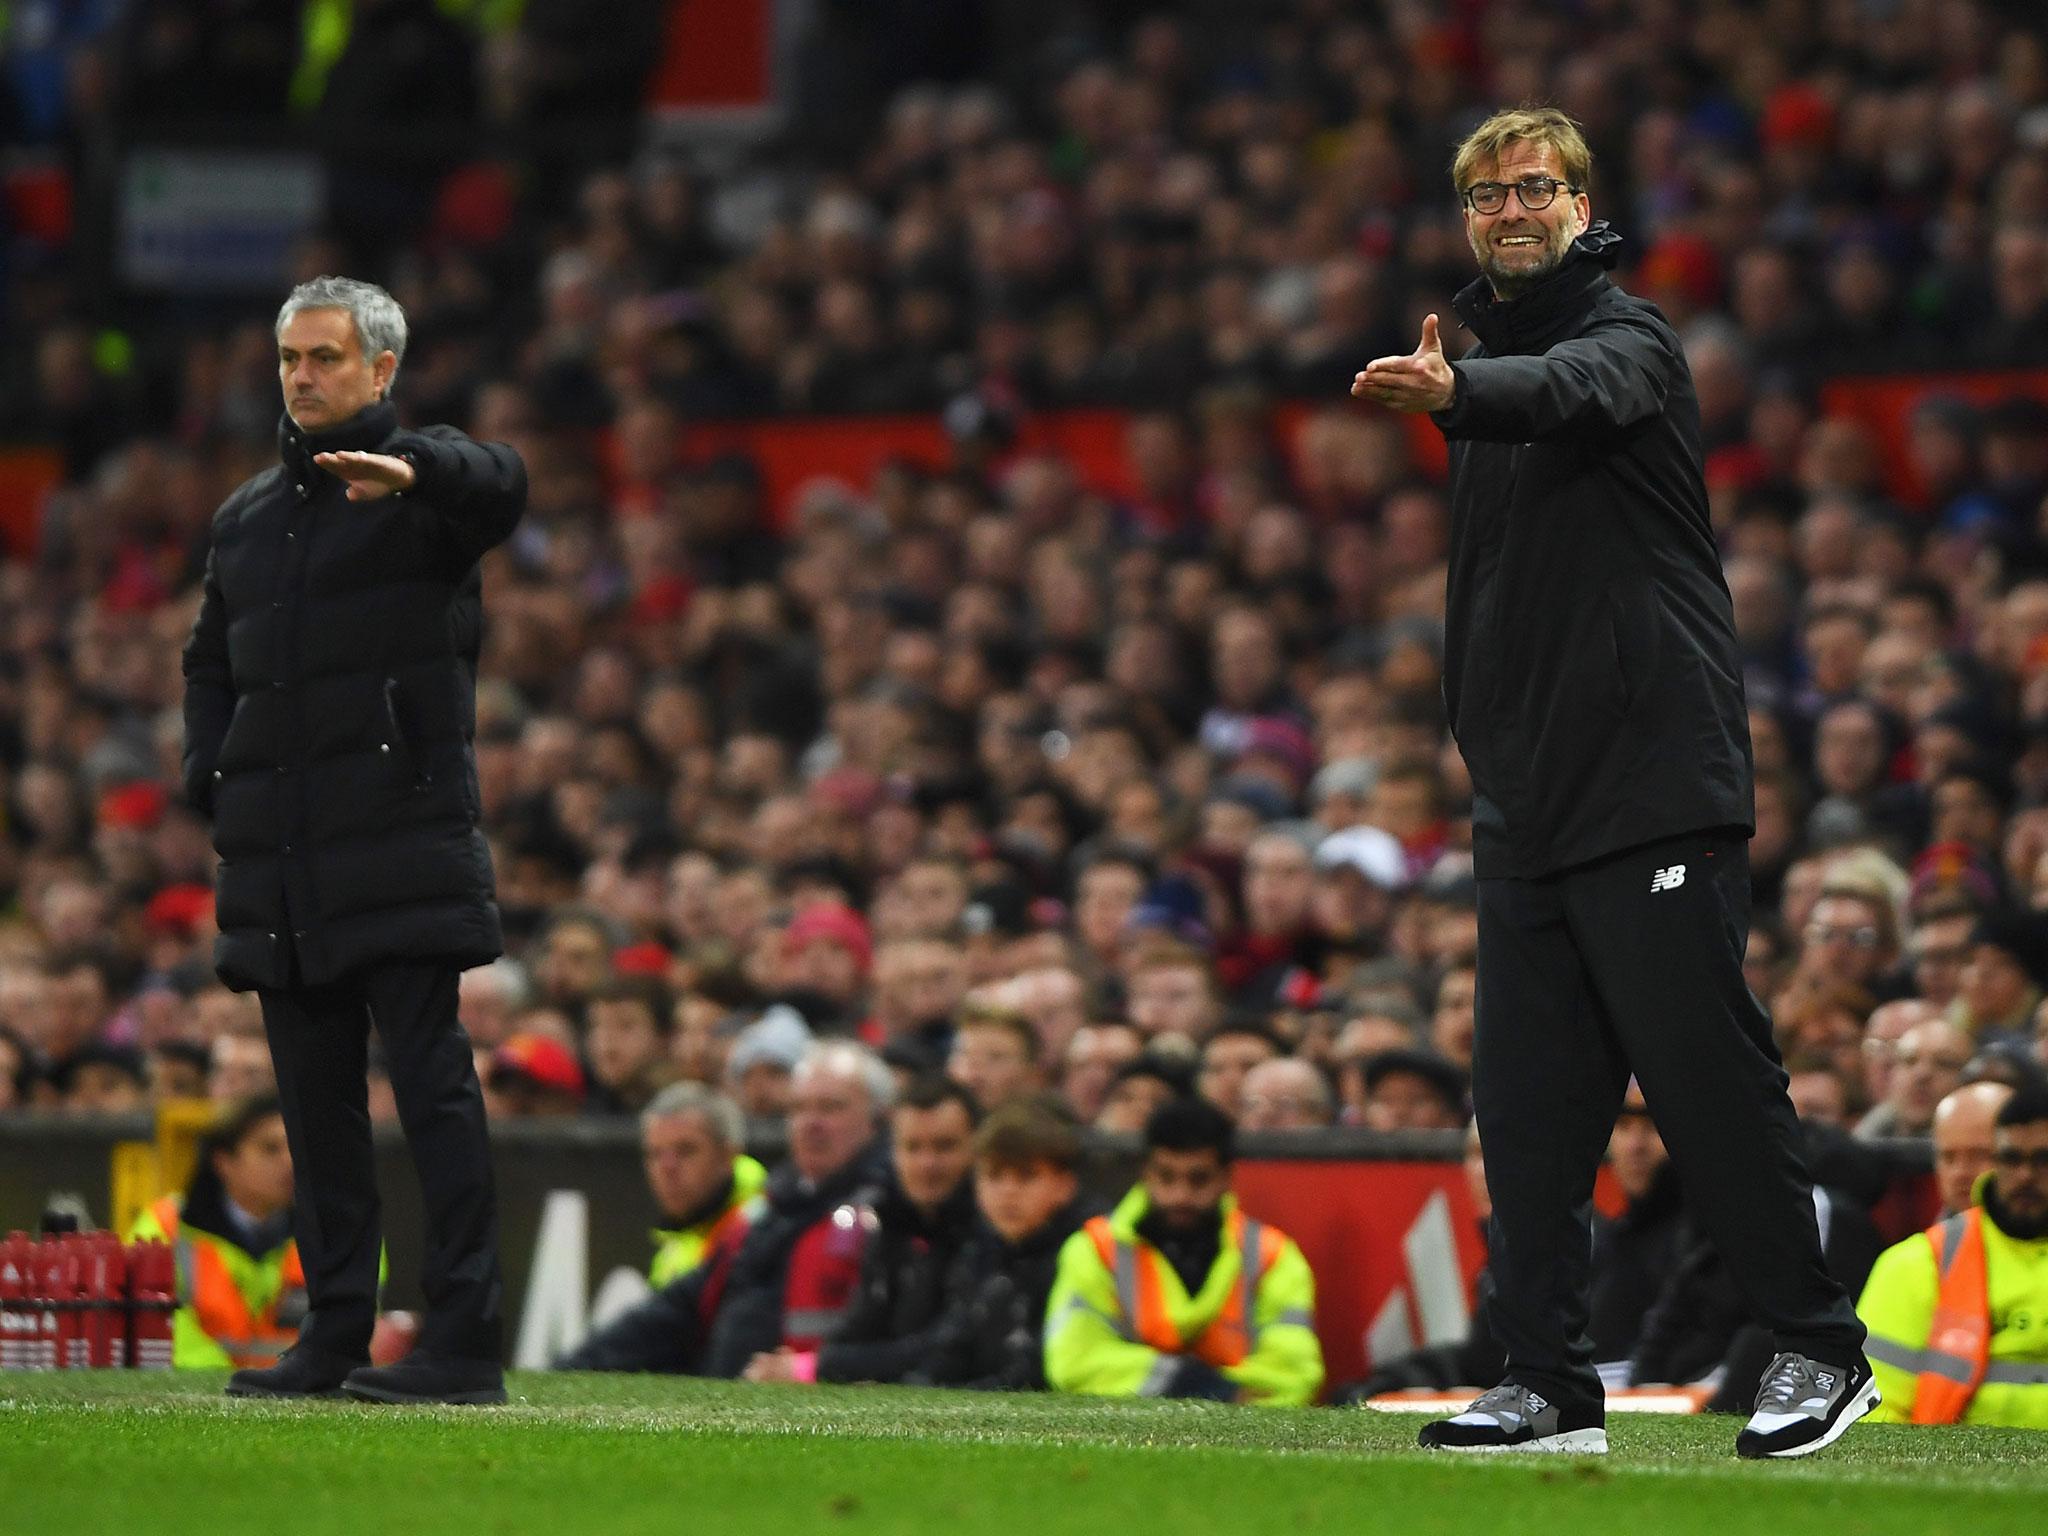 Jurgen Klopp insisted that at the end of the day it's all about winning